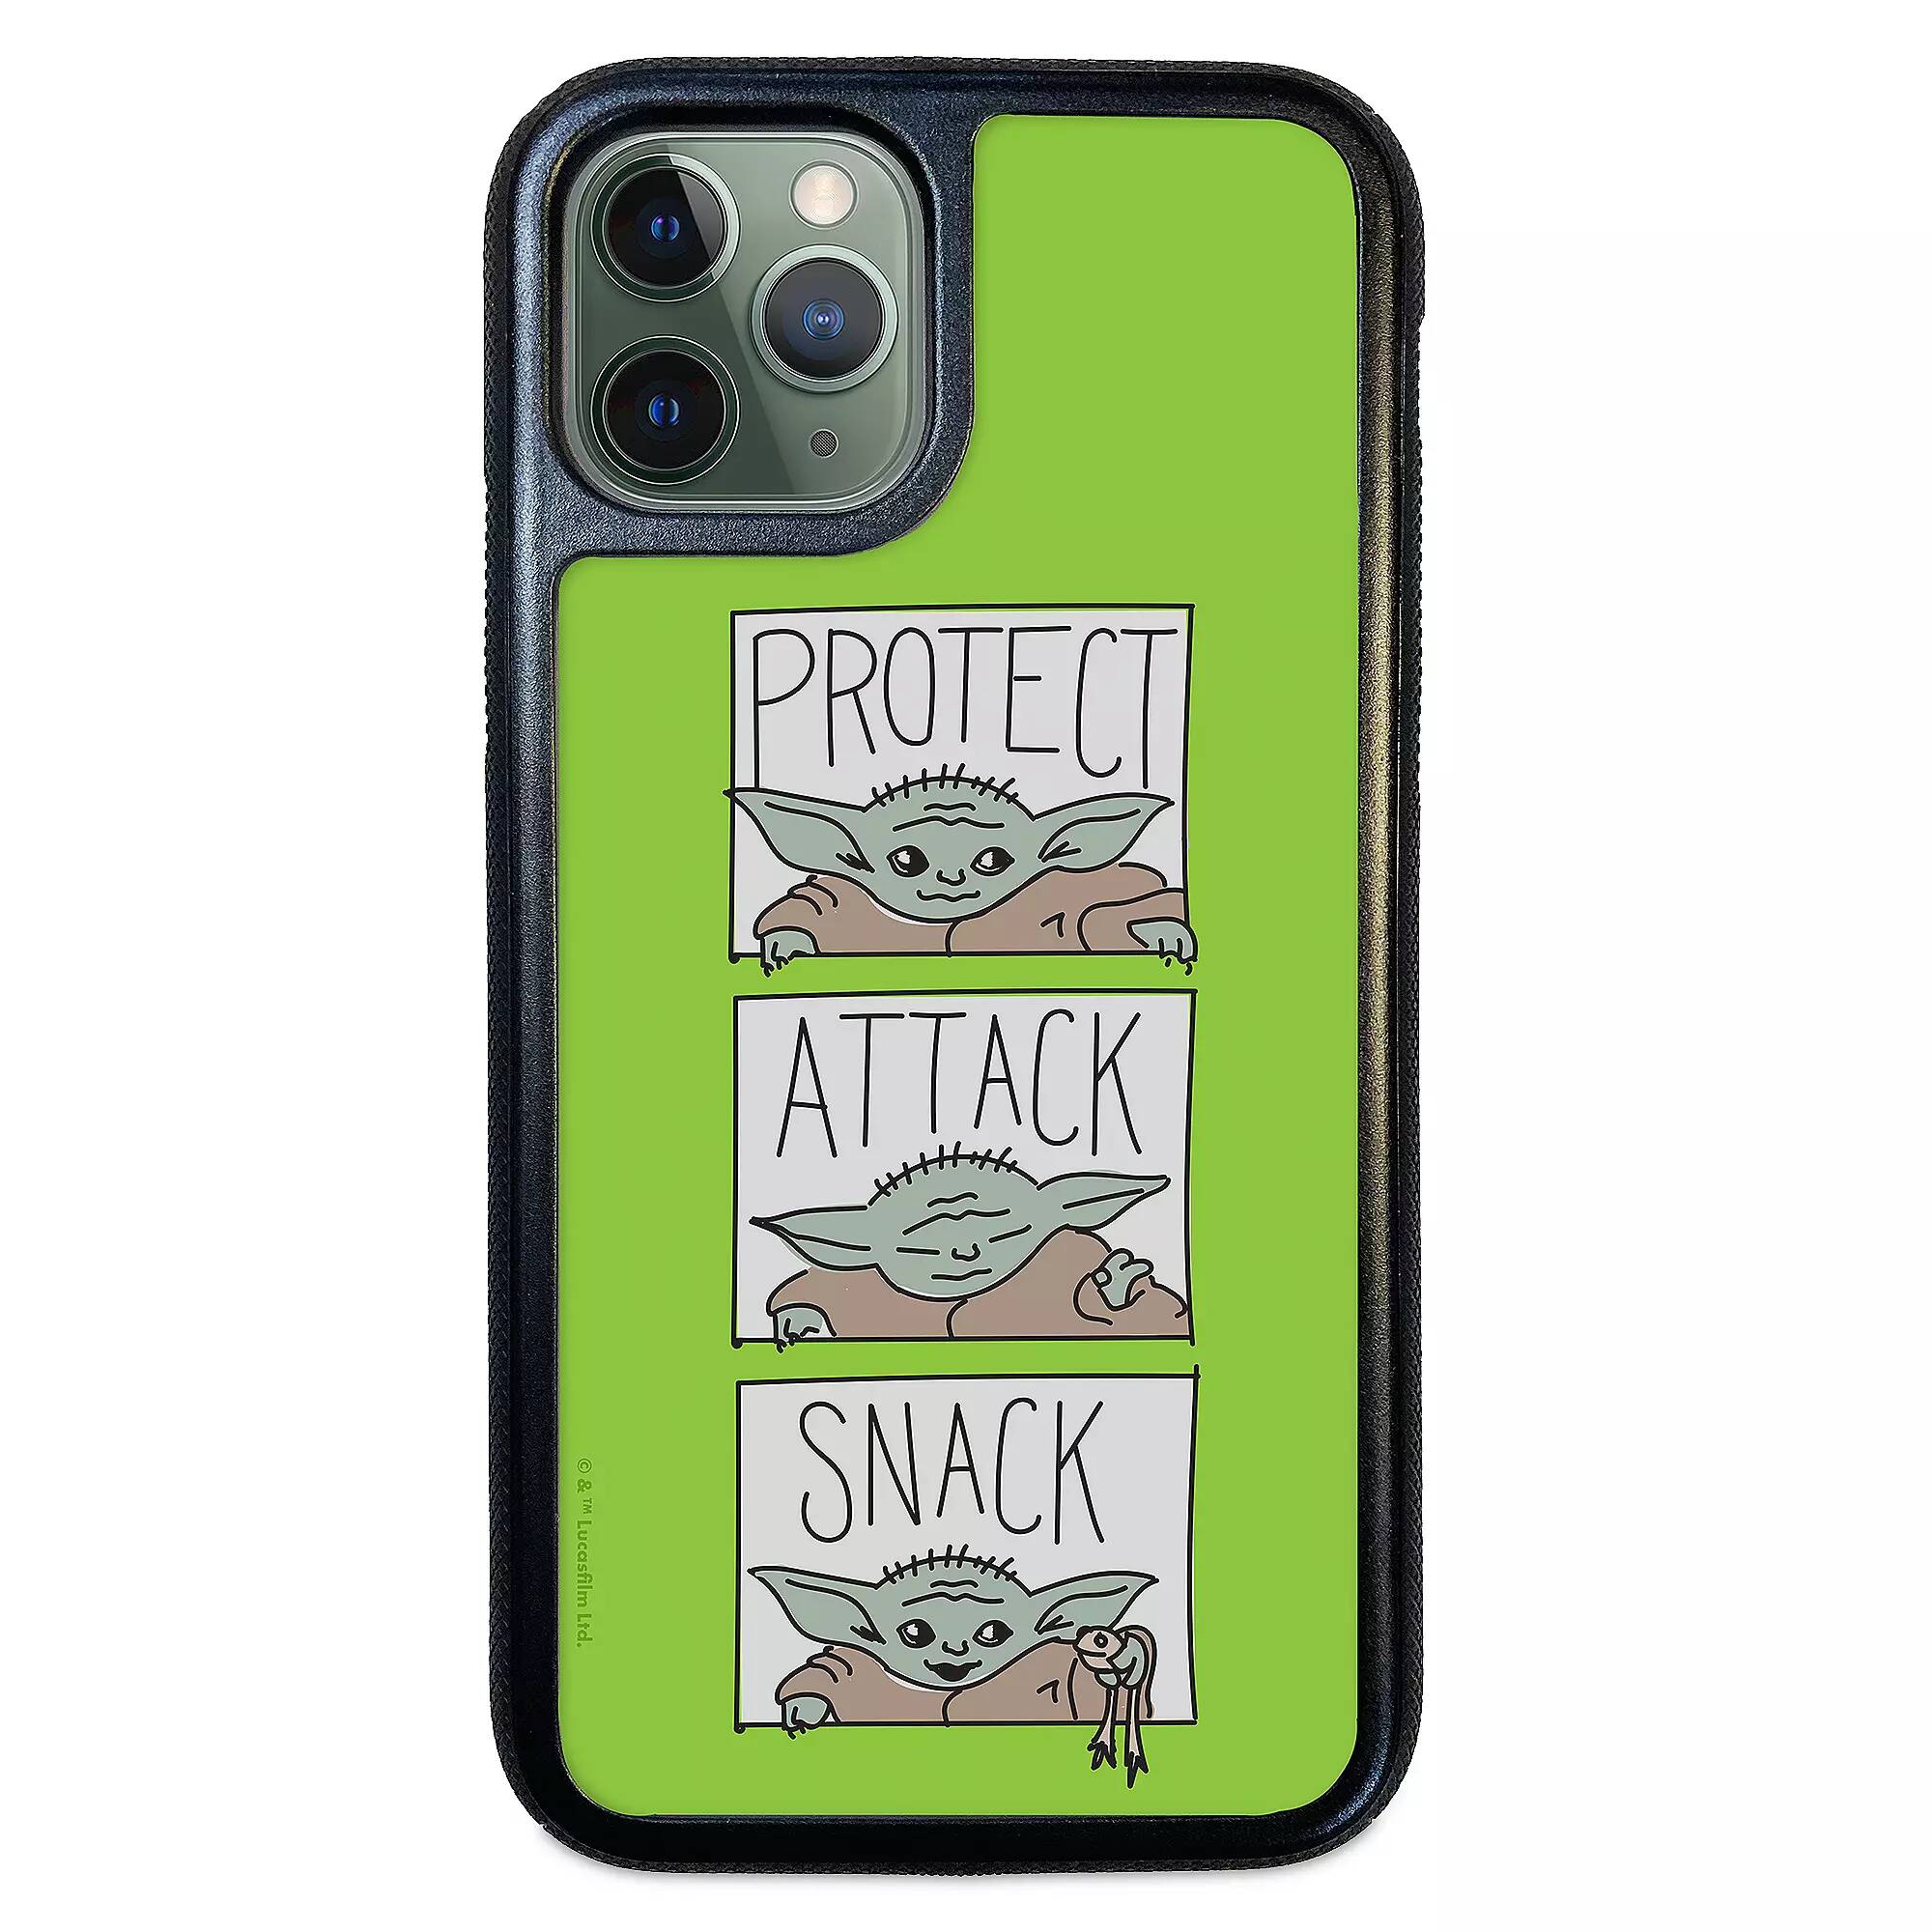 Protech Attack Snack The Child Phone Case